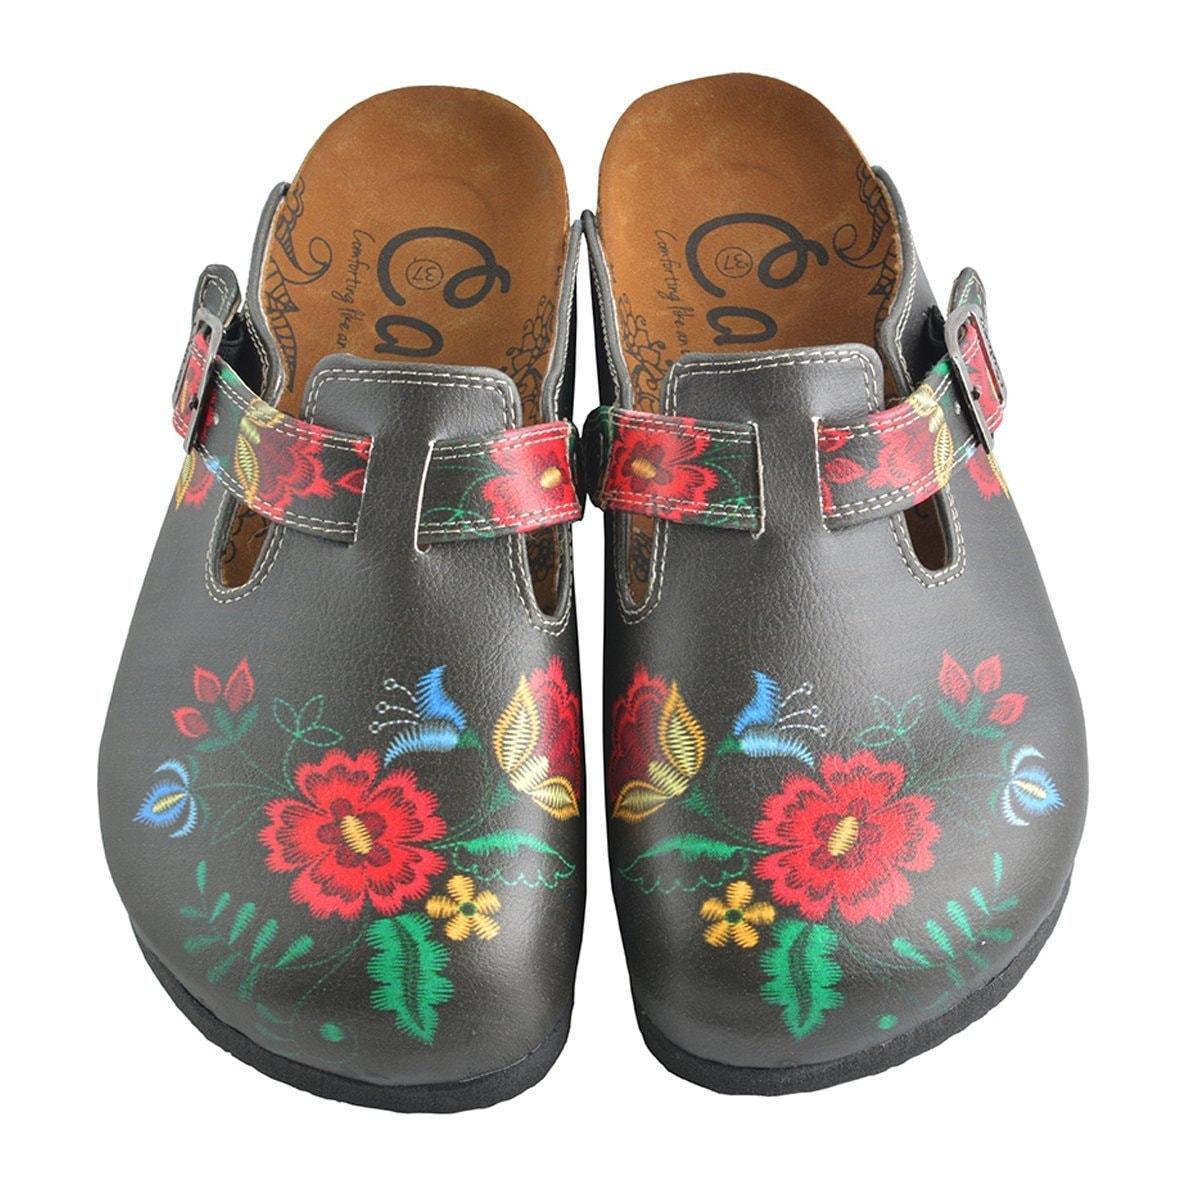 Gray & Red Floral Clogs WCAL355 (737670103136)